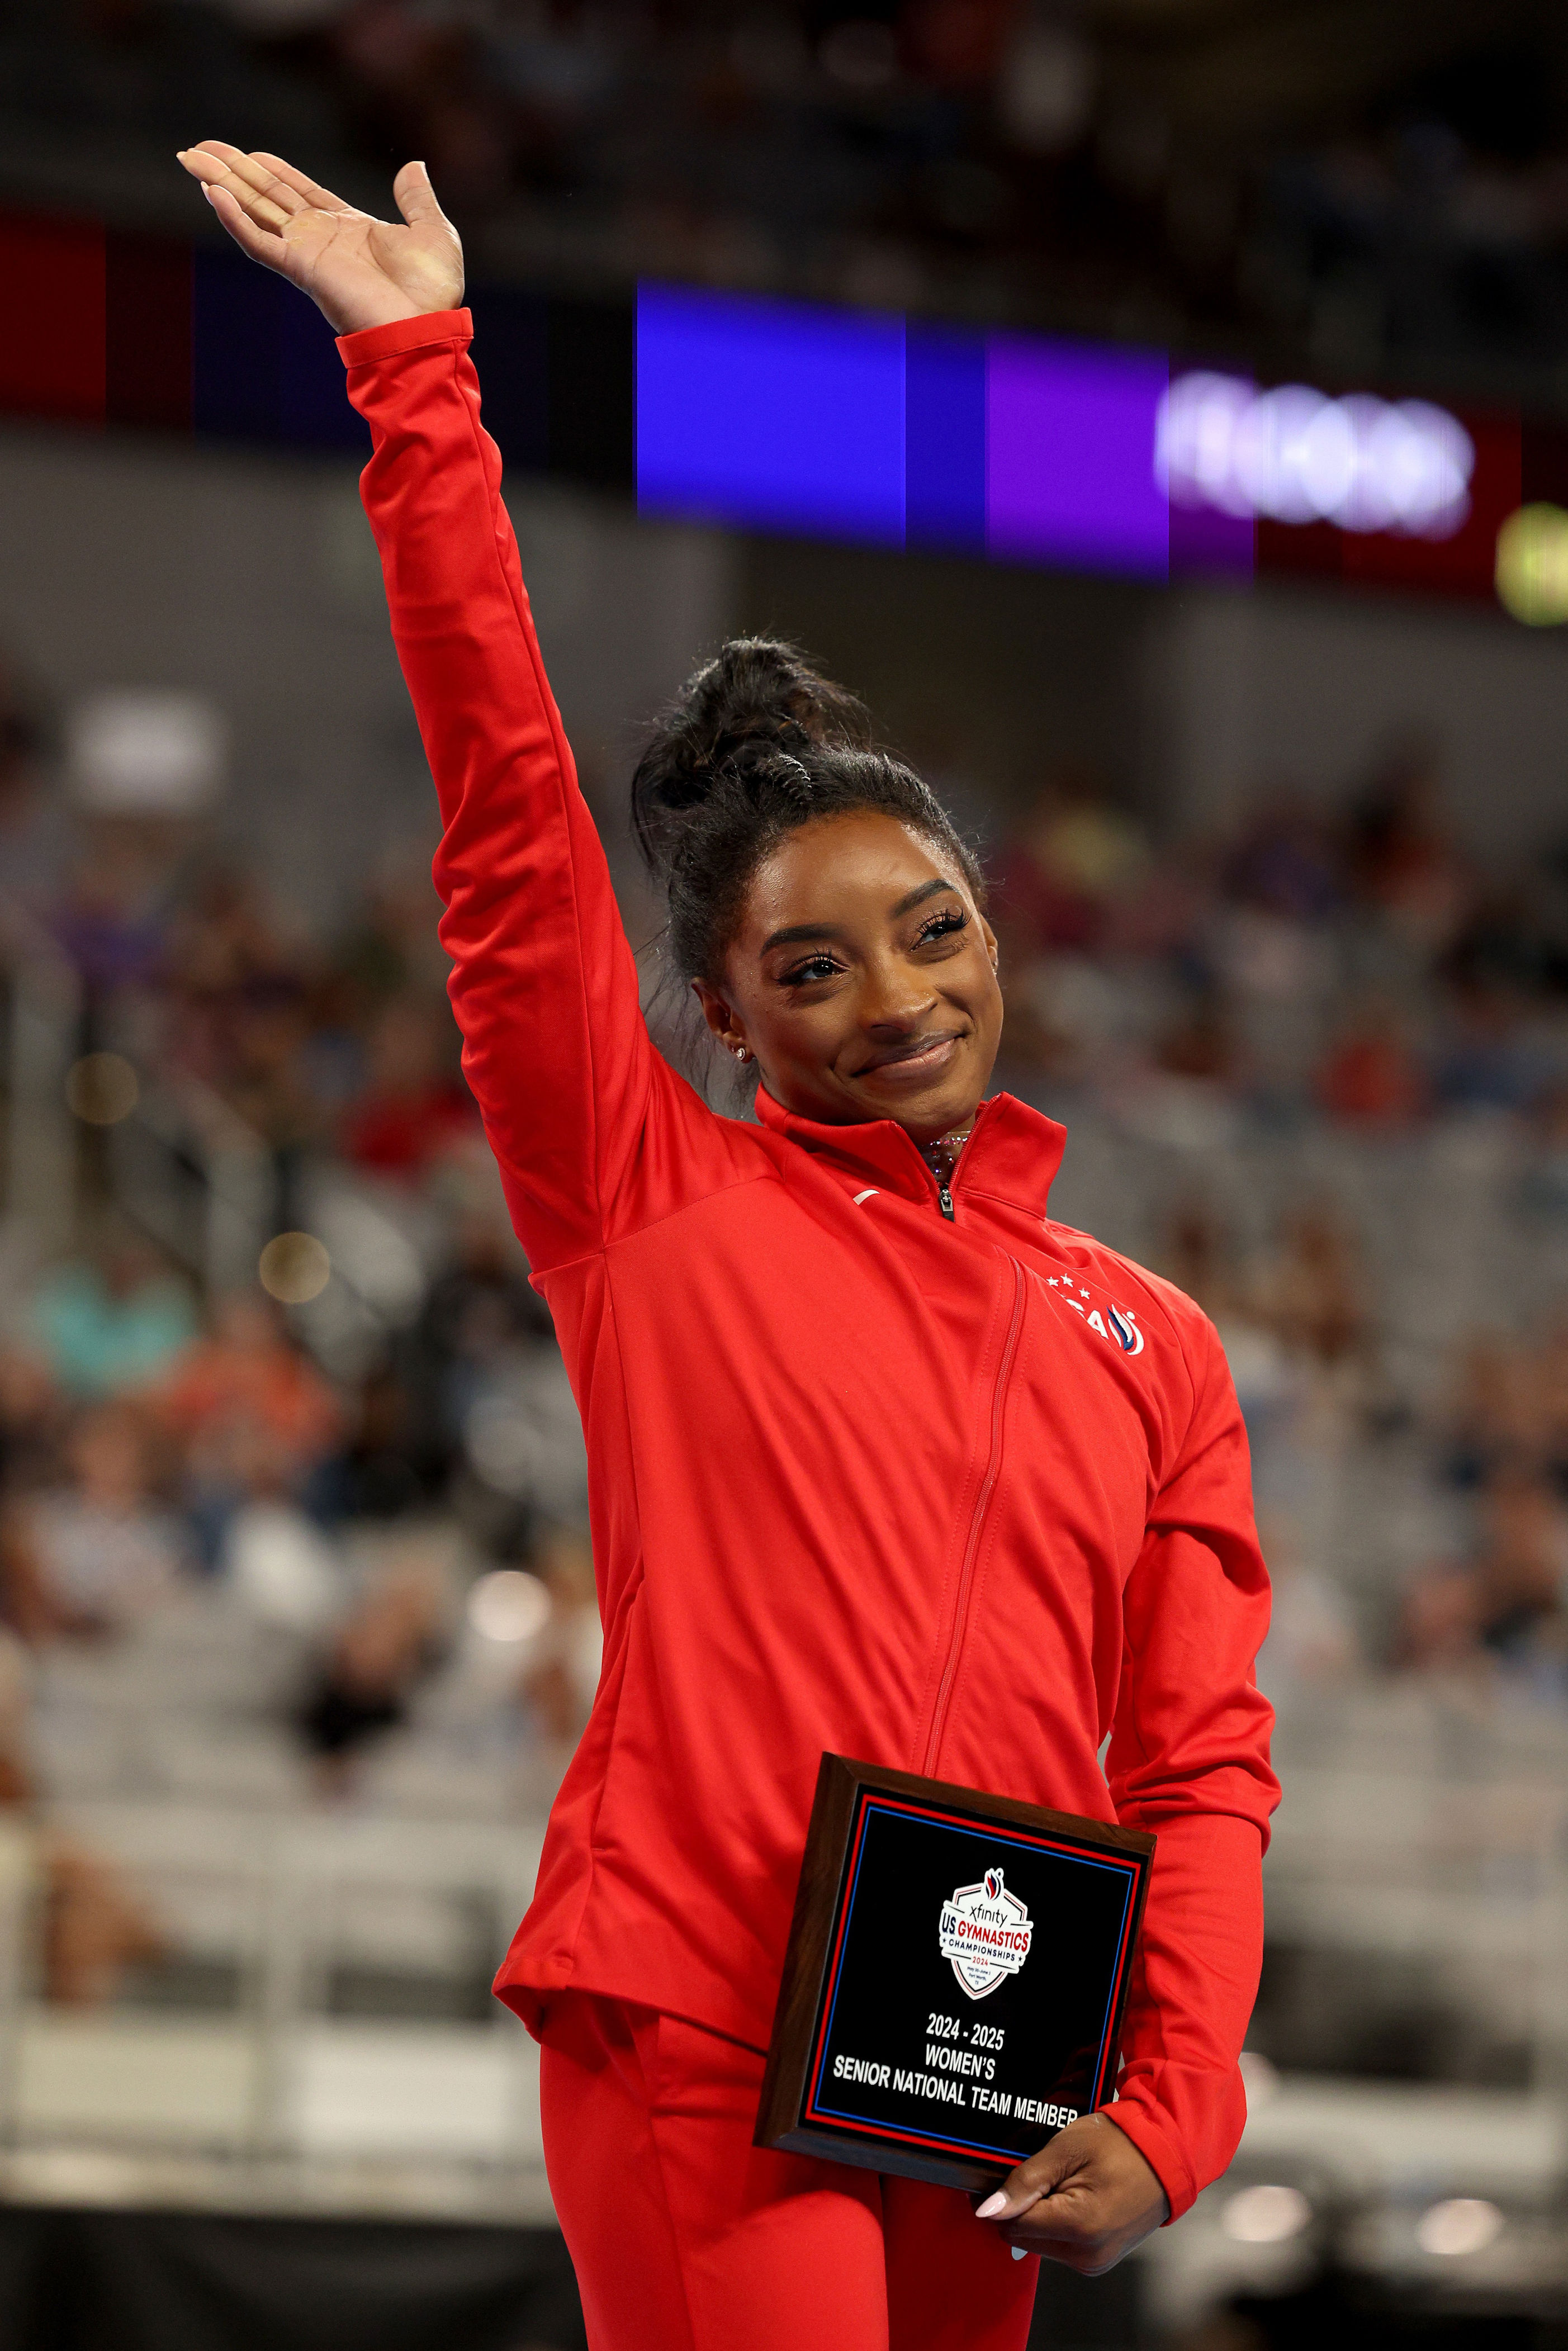 <p>Simone Biles is one of the most talented gymnasts our generation has seen. According to her own <strong><a href="https://simonebiles.com/about/">website</a></strong>, she's received 25 medals from the World Championship, <em>and</em> has four gold medals from Olympic competitions. </p><p>If that weren't enough, Simone won the Laureus World Sports Award three times for Sportswoman of the Year, alongside being on several other highly influential lists including the <em>Forbes</em> 30 Under 30 and <em>USA Today</em> 100 Women of the Century lists. </p><p>Just ahead of the 2024 Summer Olympics, she's gone on to score her ninth all-around title at U.S. gymnastics championship. <strong><a href="https://sports.yahoo.com/simone-biles-wins-record-9th-all-around-title-at-us-championships-ahead-of-2024-paris-olympics-013831807.html"><em>Yahoo Sports</em></a></strong> reports she's the first person win <em>all</em> of the titles so we're excited to see how she's going to perform towards the end of next month.</p>